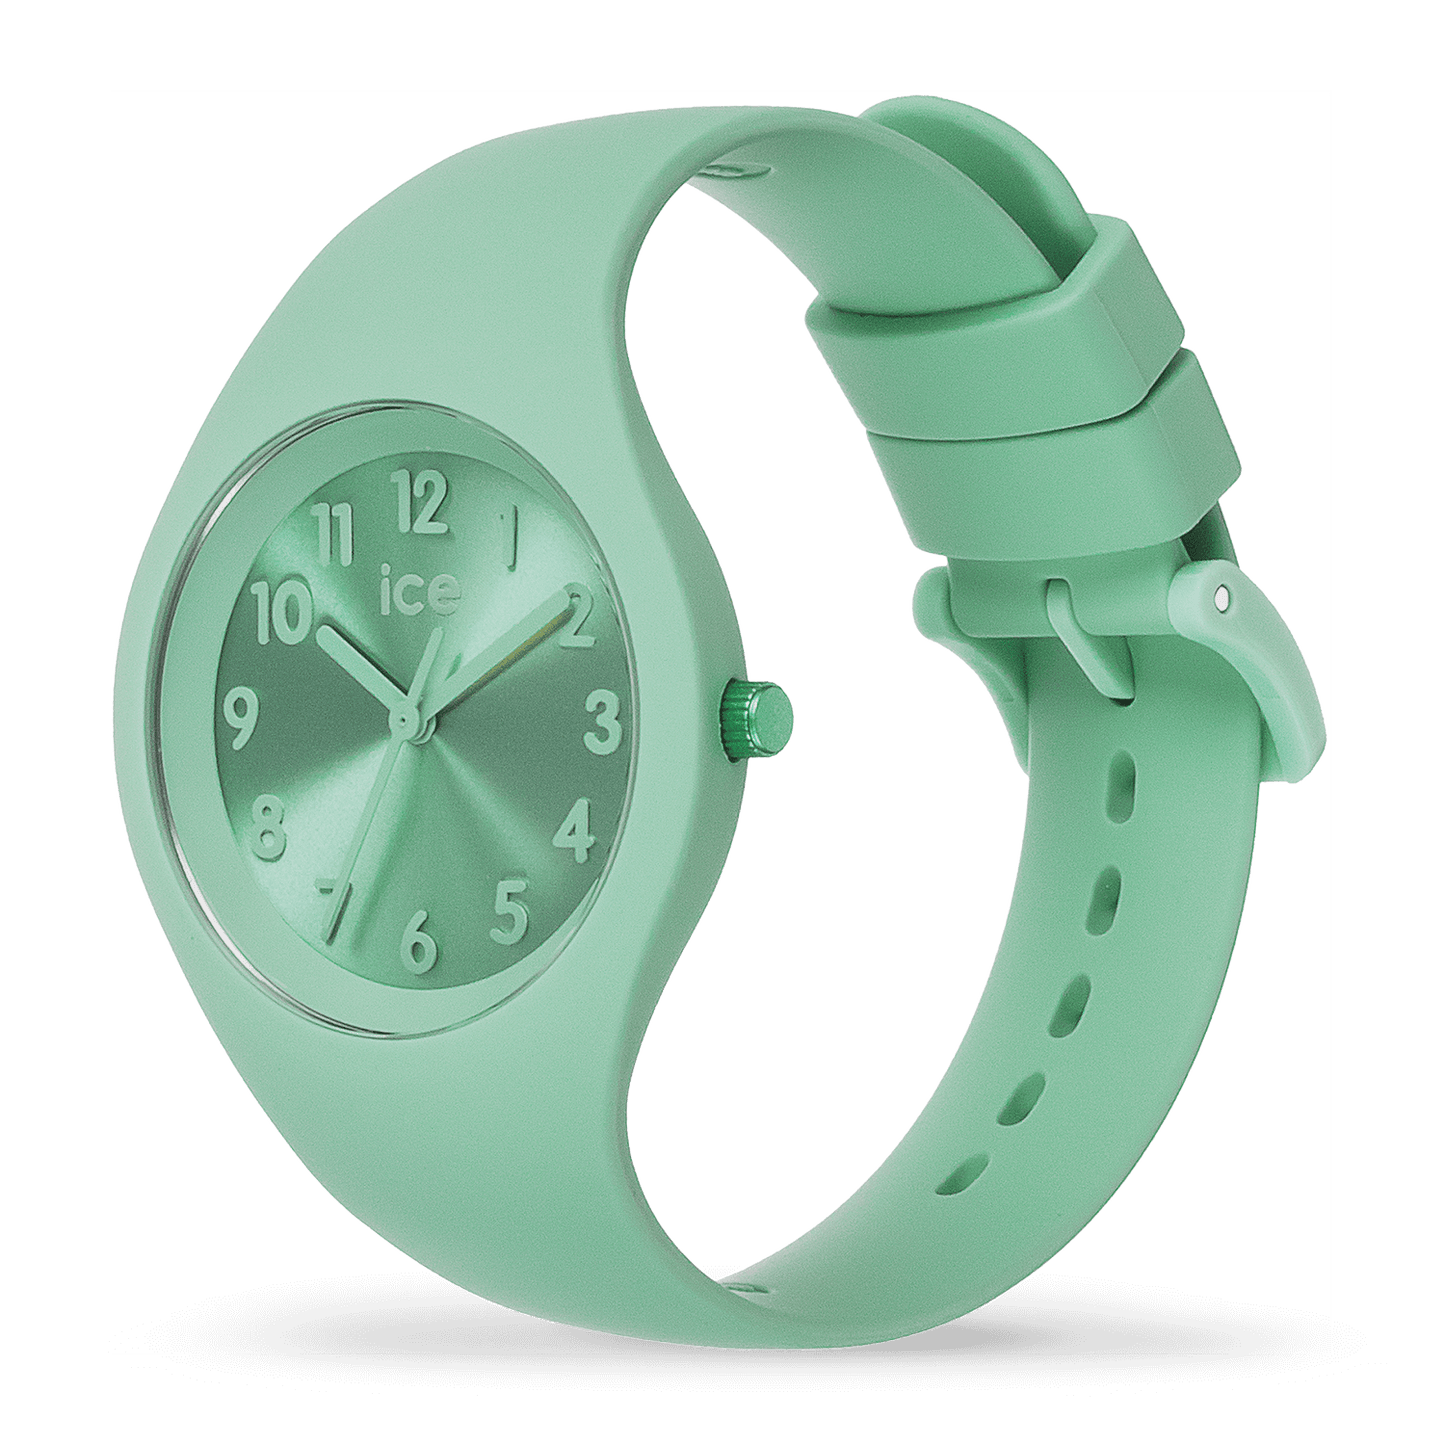 ICE WATCH Colour - Lagoon - Small